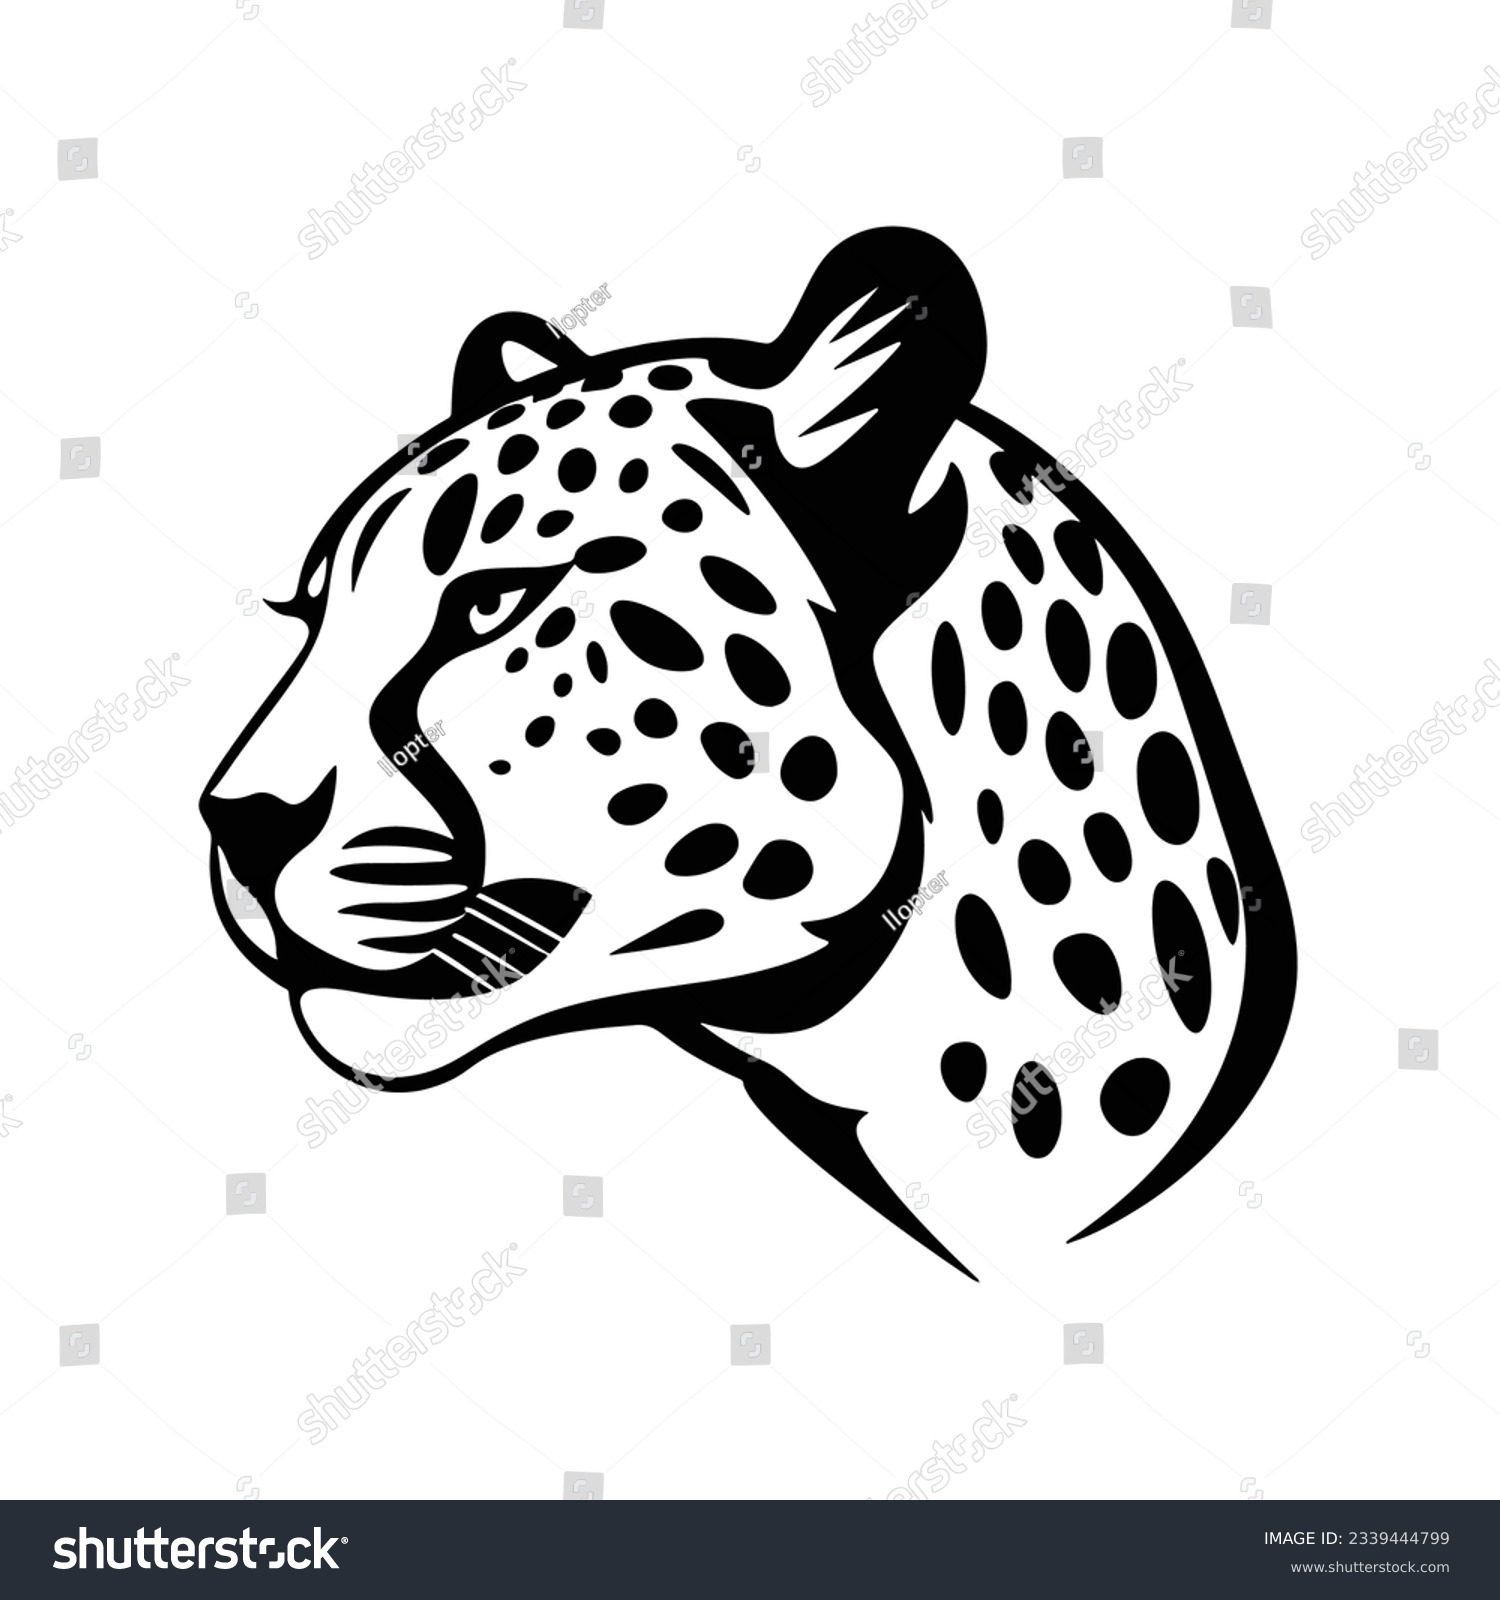 SVG of Cartoon cheetah head, Face side view, mascot or logo design, vector illustration isolated  svg